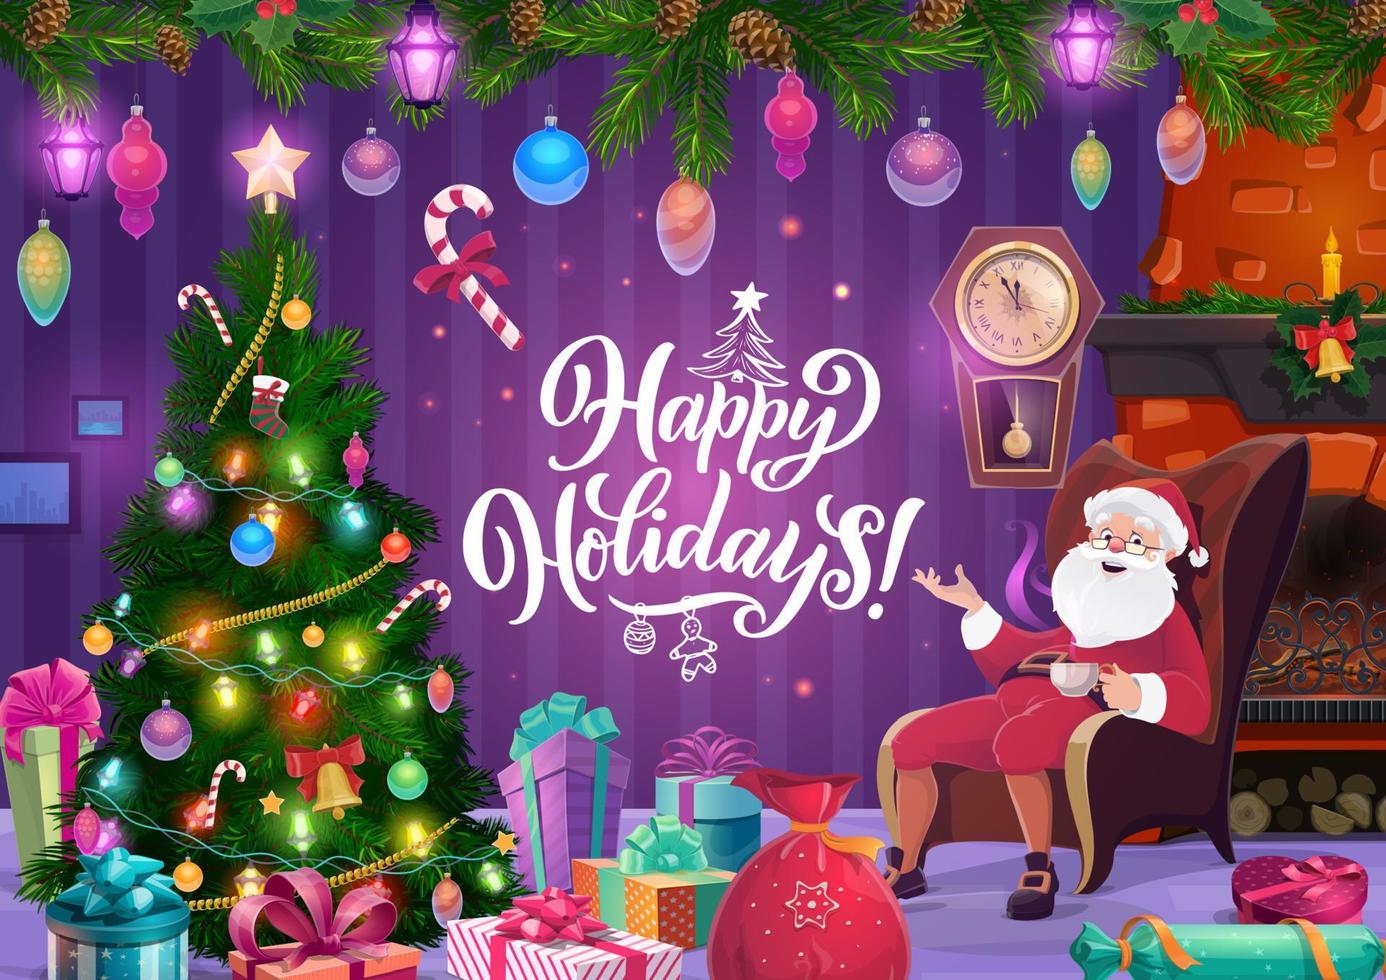 Santa, Christmas fireplace and New Year gifts vector